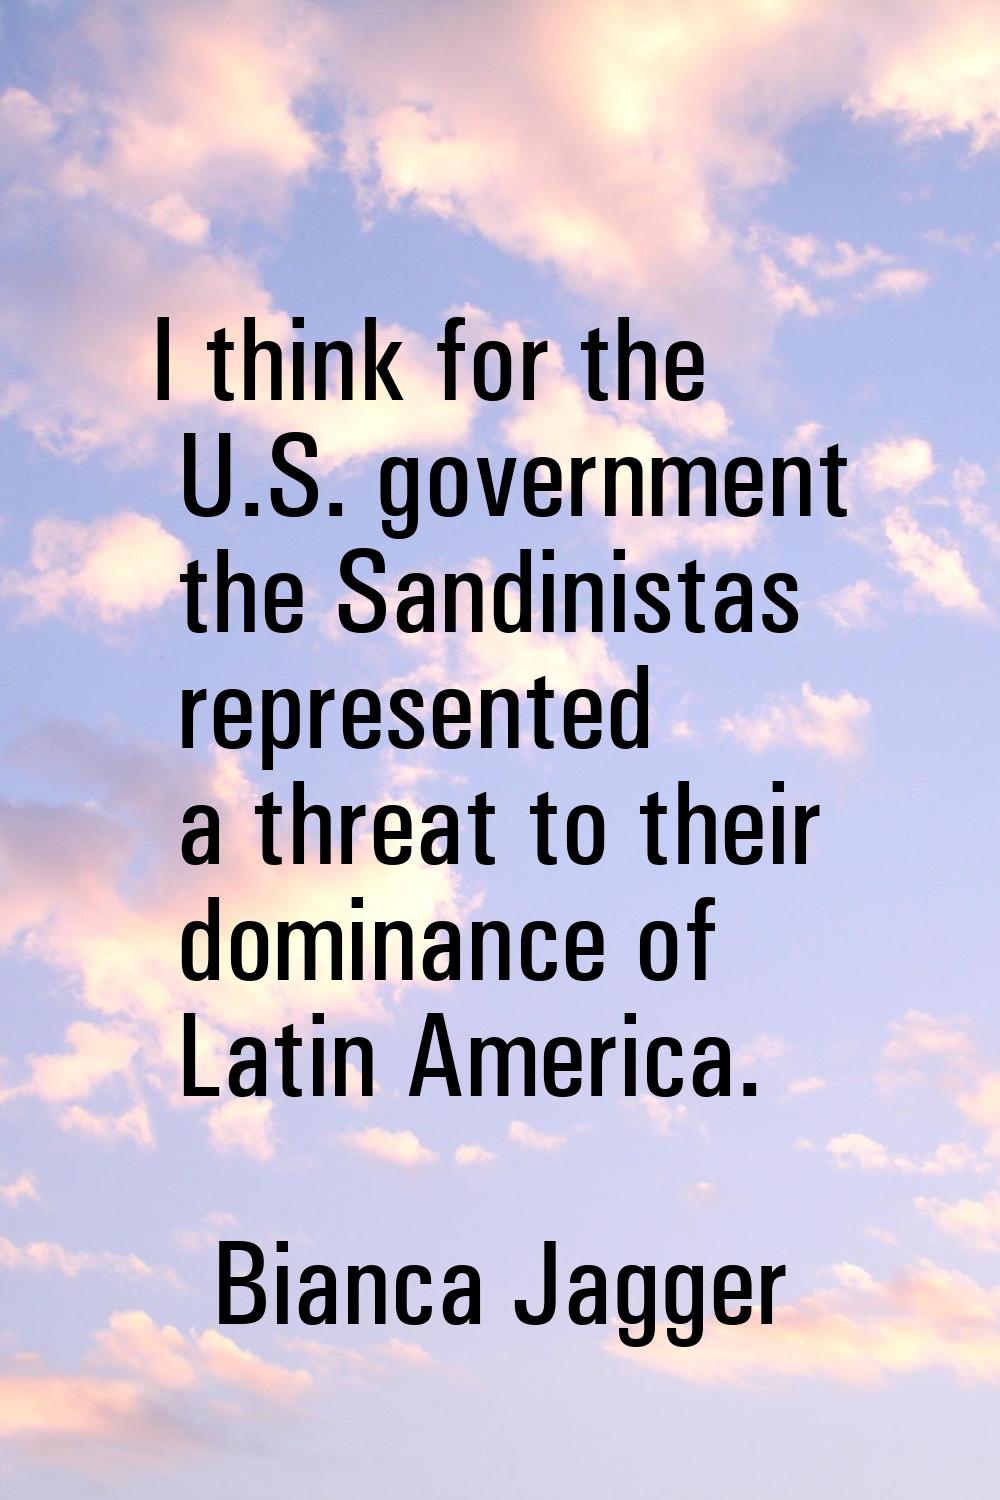 I think for the U.S. government the Sandinistas represented a threat to their dominance of Latin Am